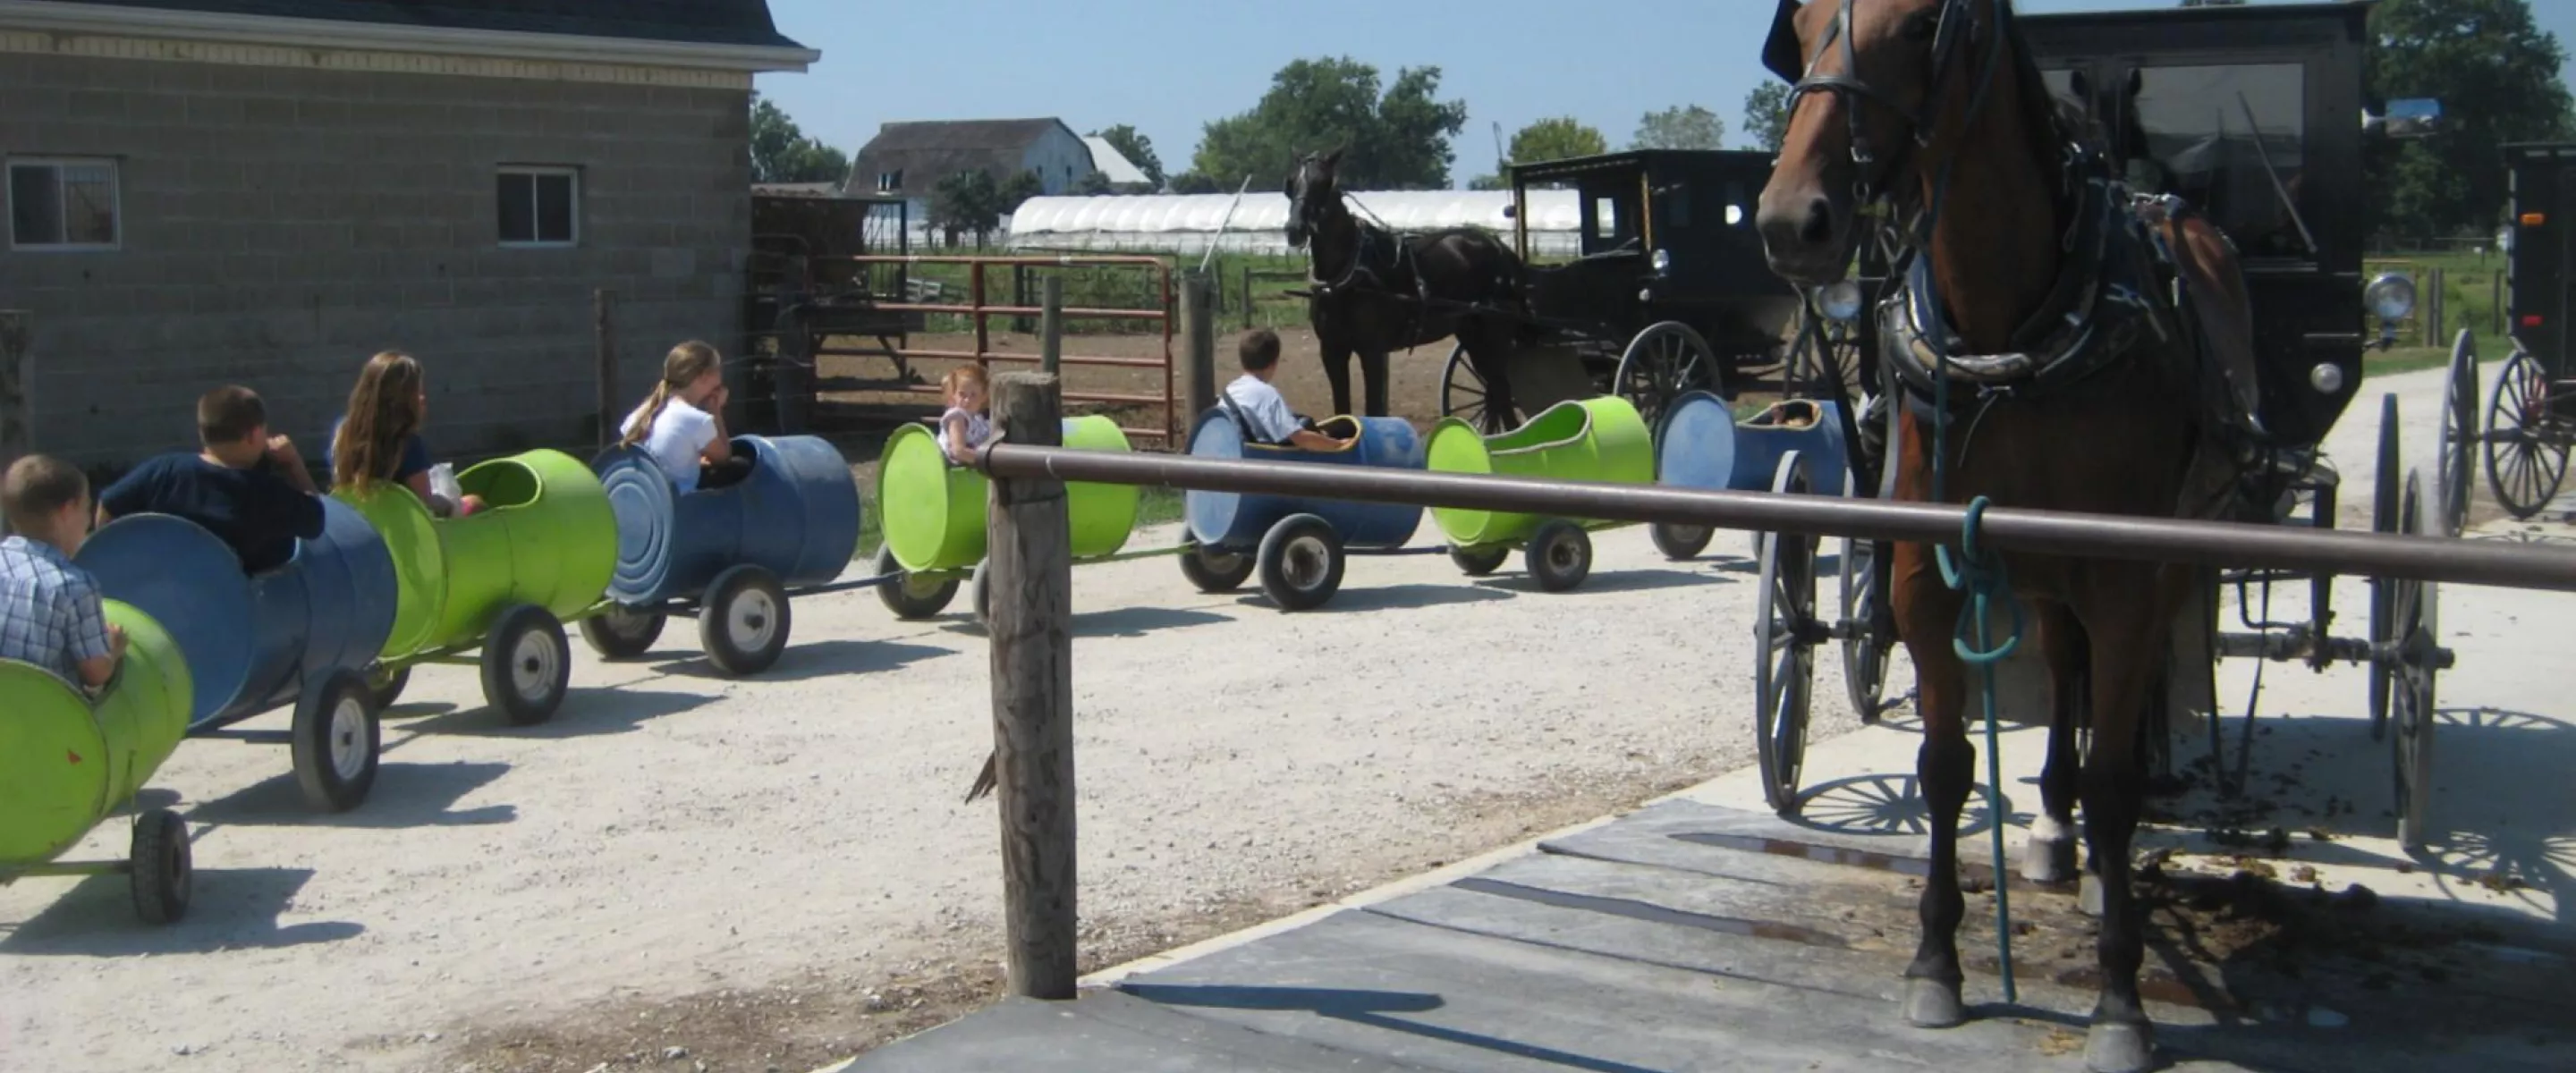 Children ride in barrels on wheels. There are Amish buggies and horses parked nearby.